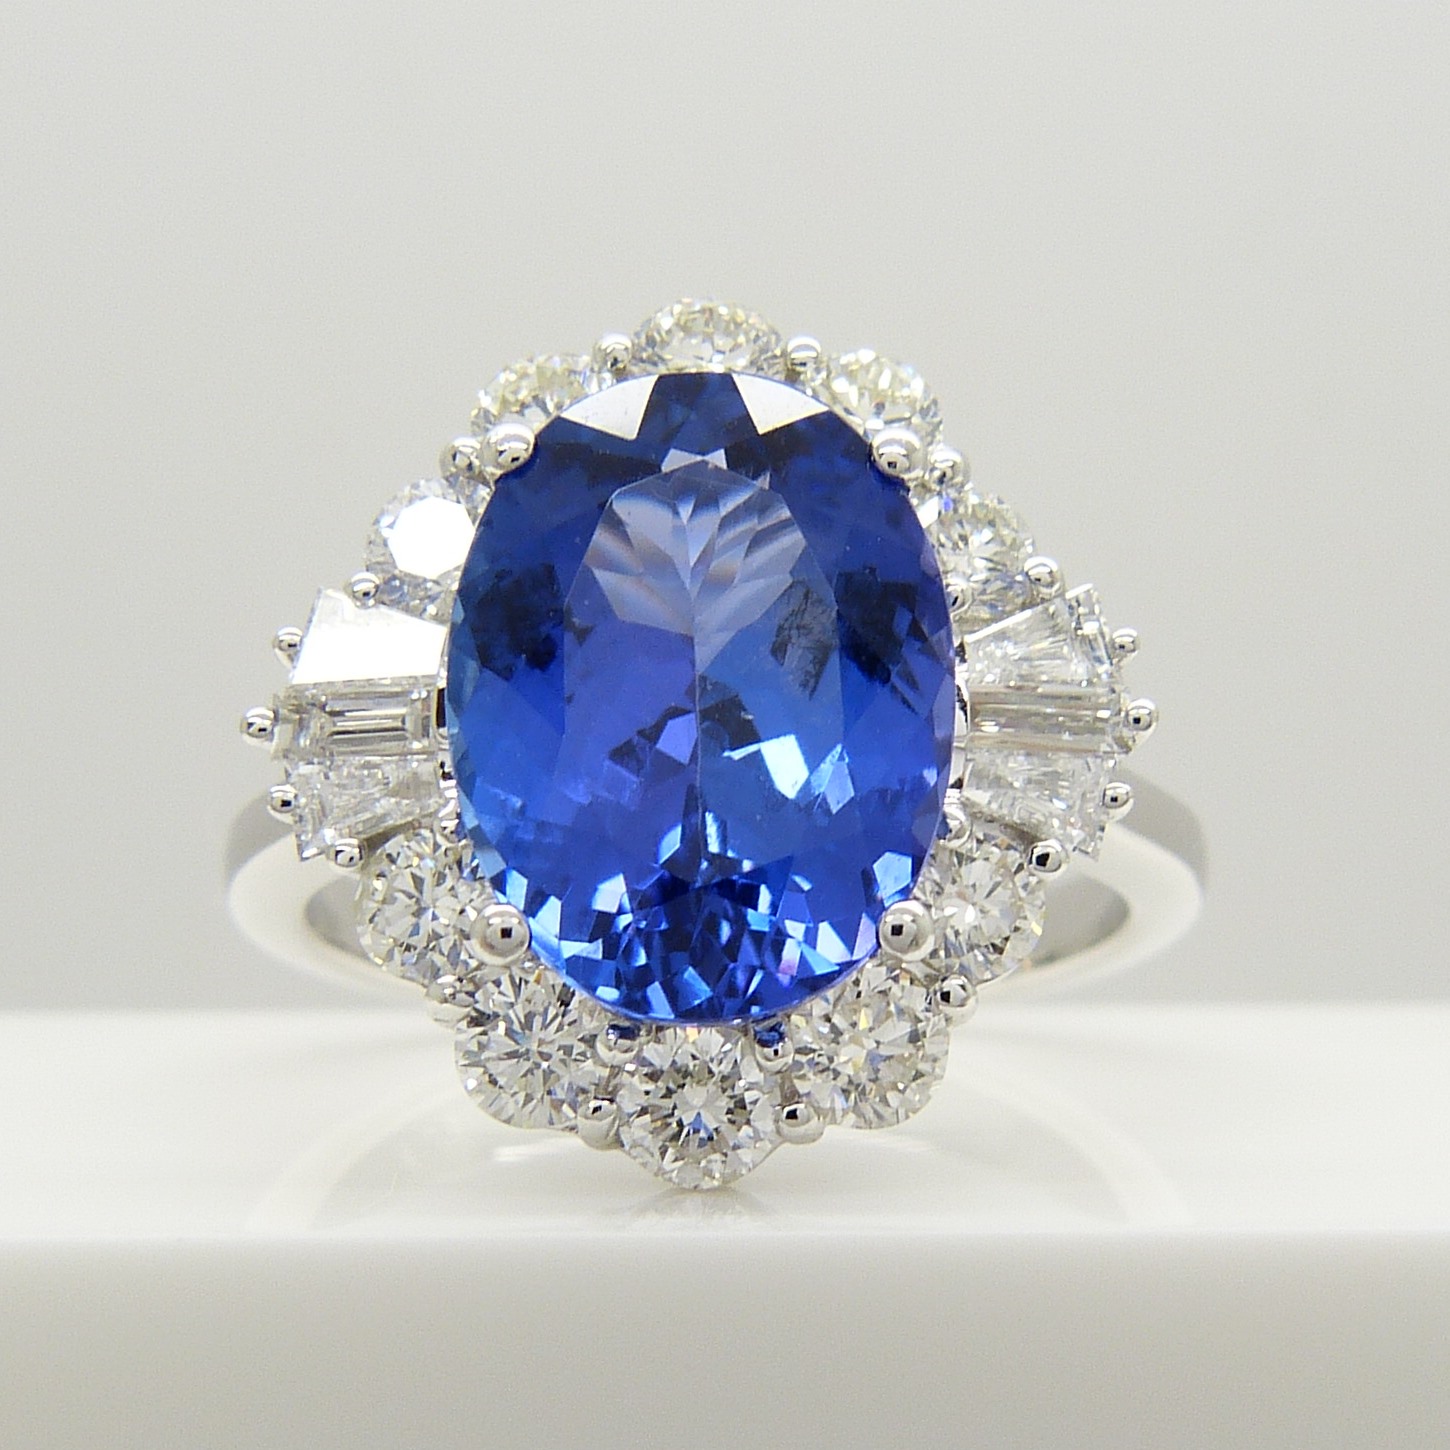 A stunning, certificated loupe-clean large tanzanite and diamond statement ring in 18ct white gold - Image 5 of 9